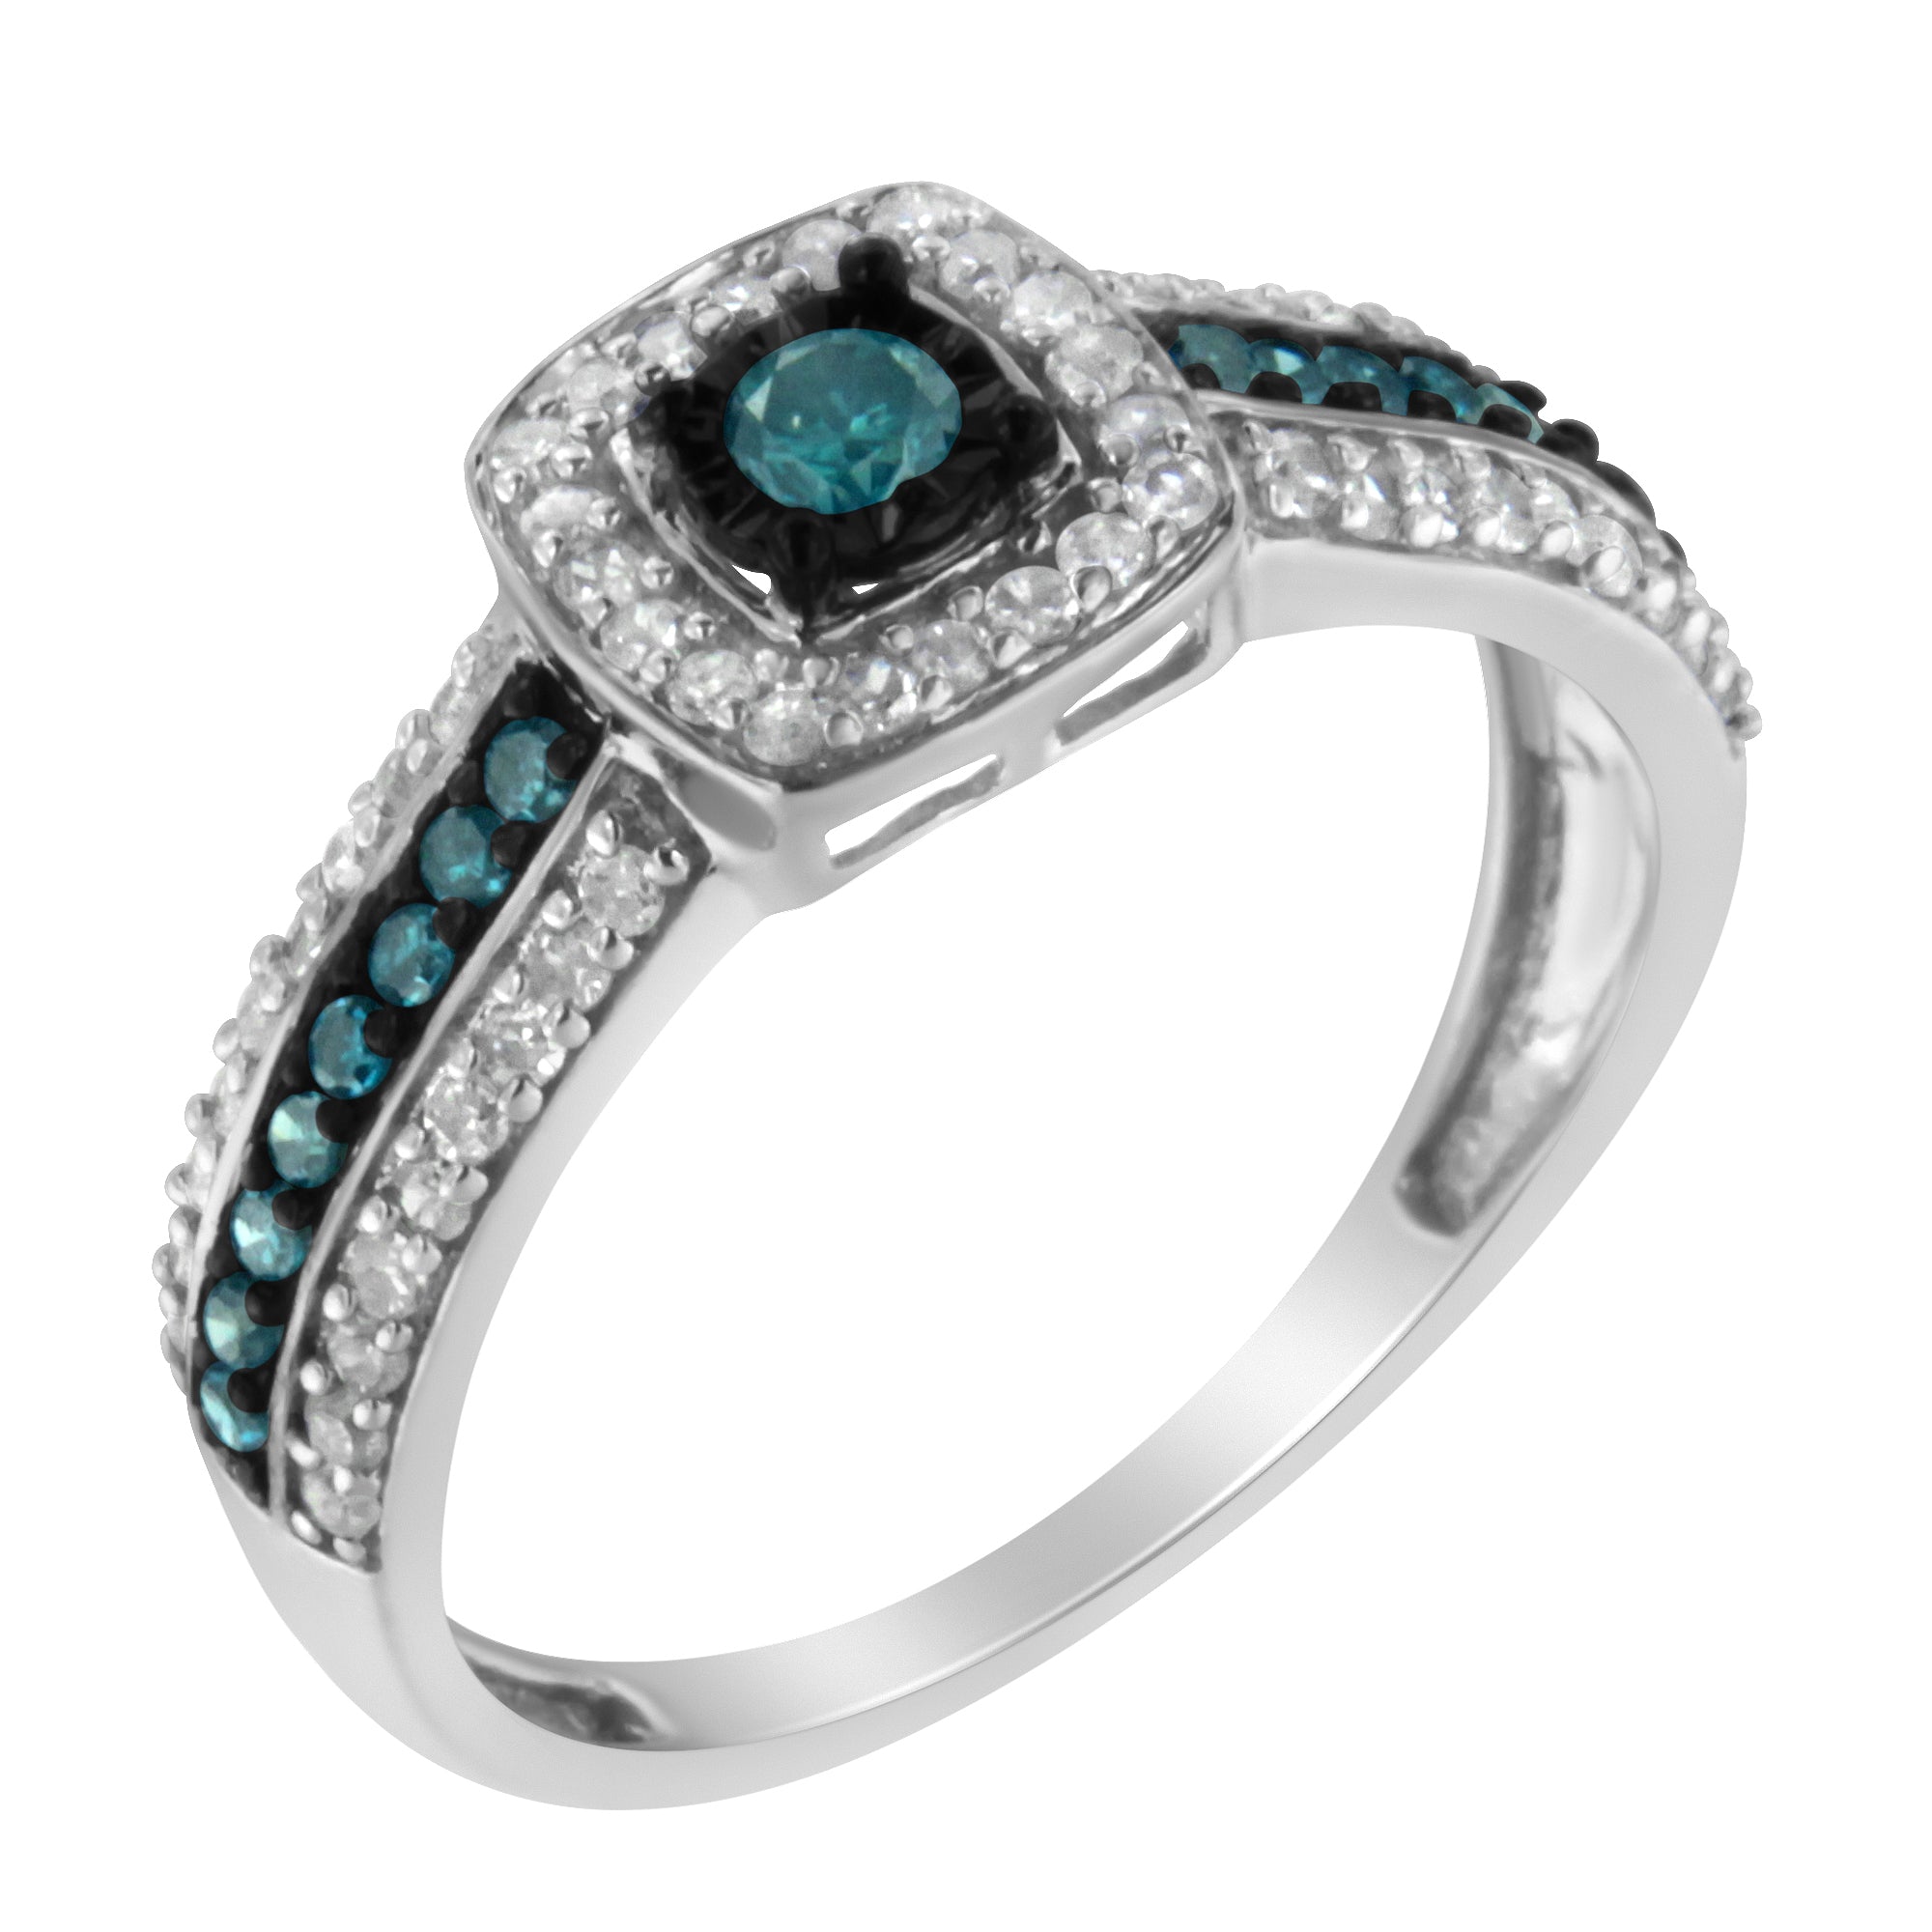 .925-Sterling-Silver-Treated-Blue-Miracle-Set-Diamond-Engagement-Ring-(1/2-Cttw,-J-K-Color,-I1-I2-Clarity)-Size-6-Rings